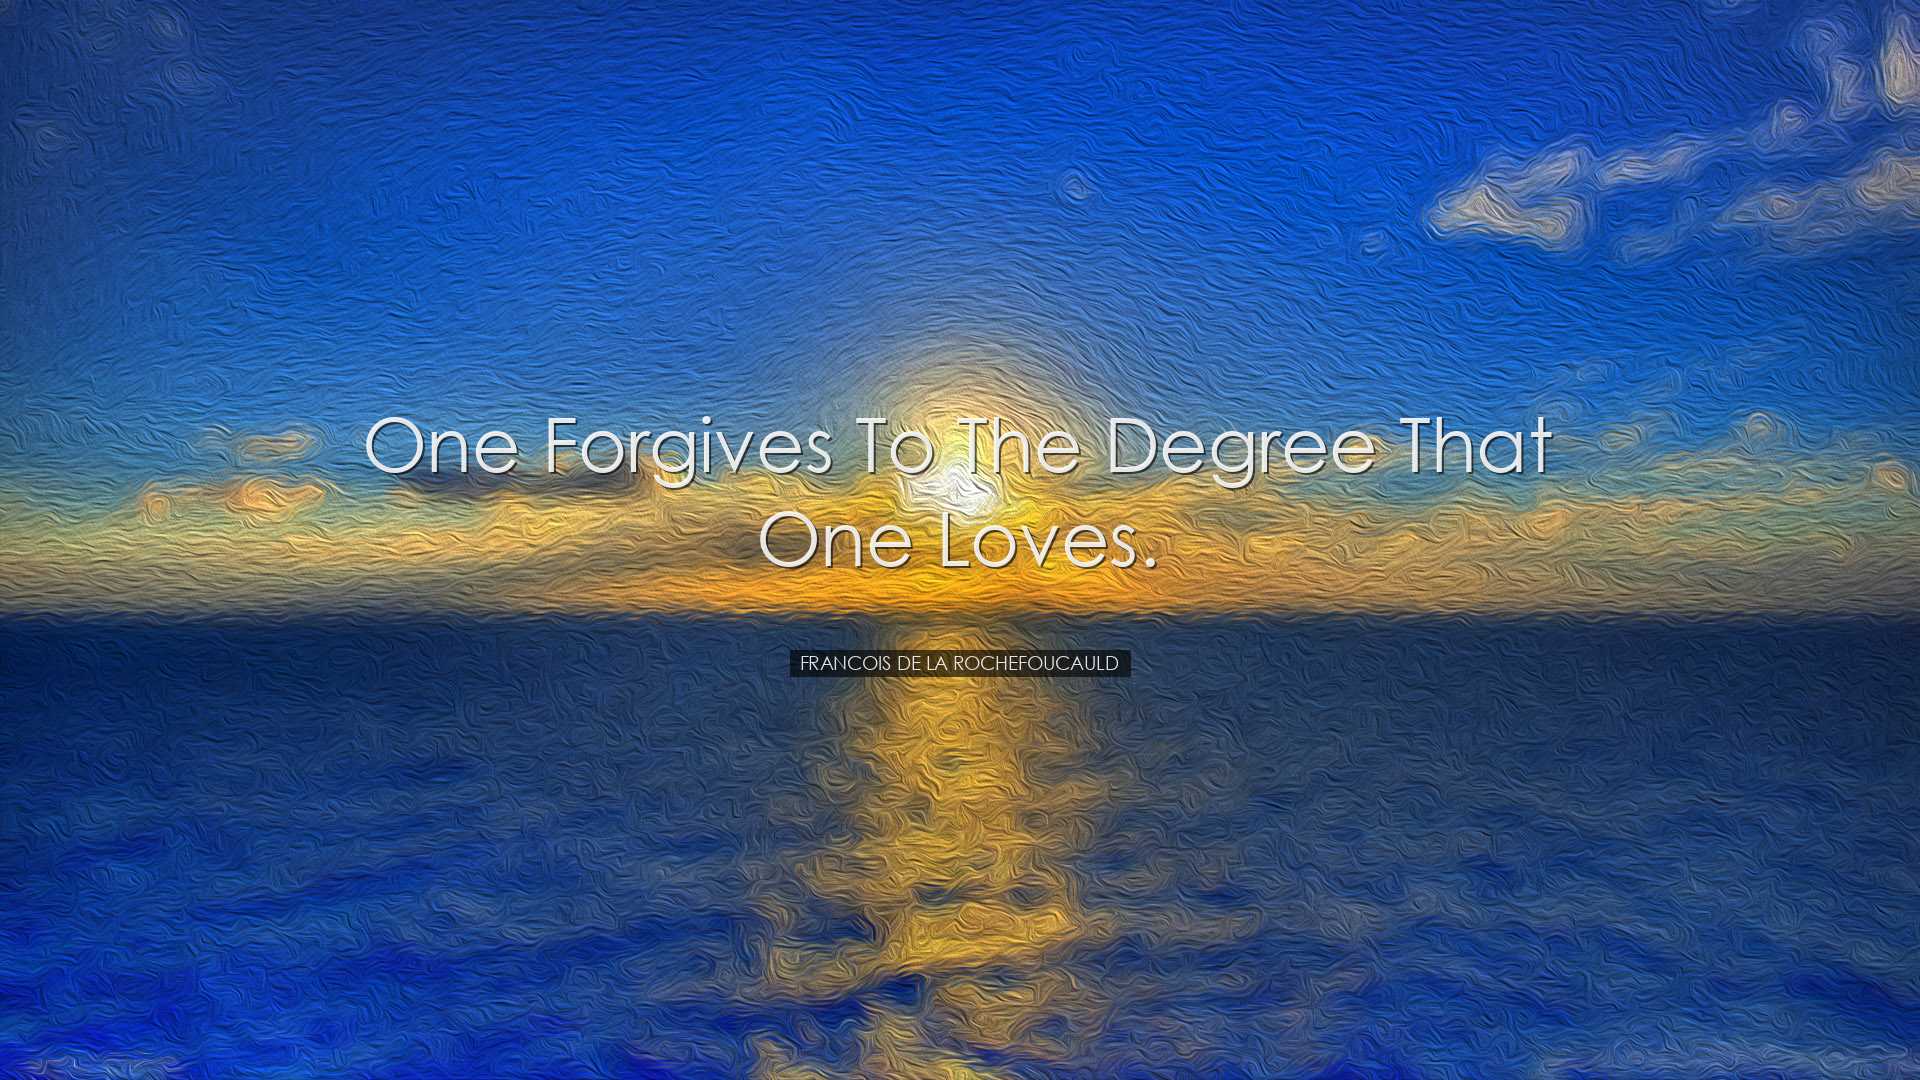 One forgives to the degree that one loves. - Francois de La Rochef